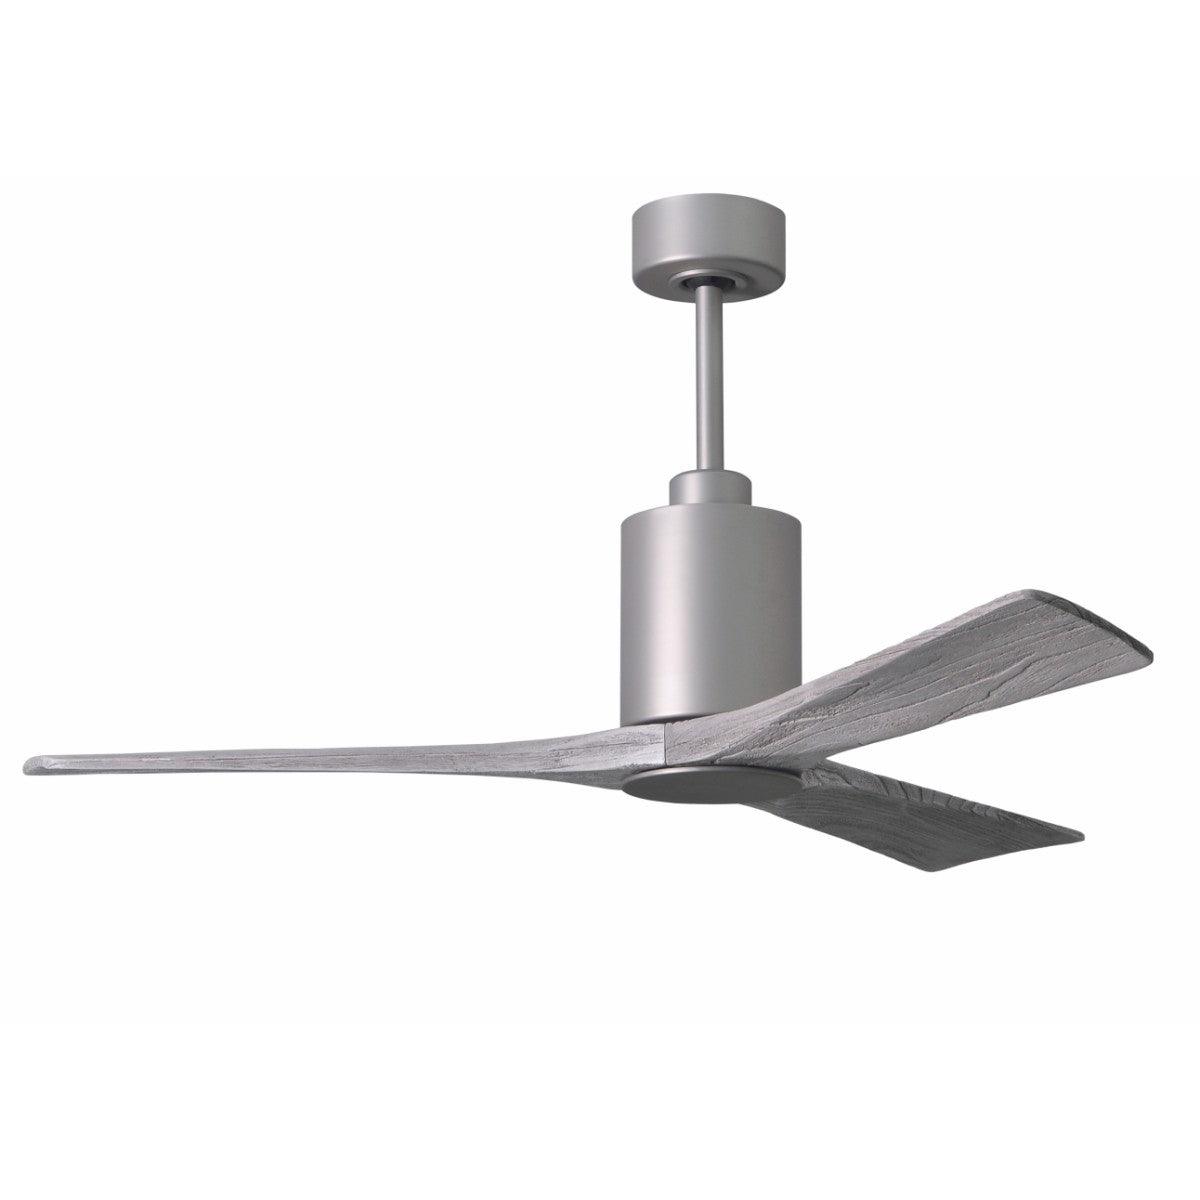 Patricia 52 Inch 3 Blades Modern Outdoor Ceiling Fan With Light, Wall And Remote Control Included